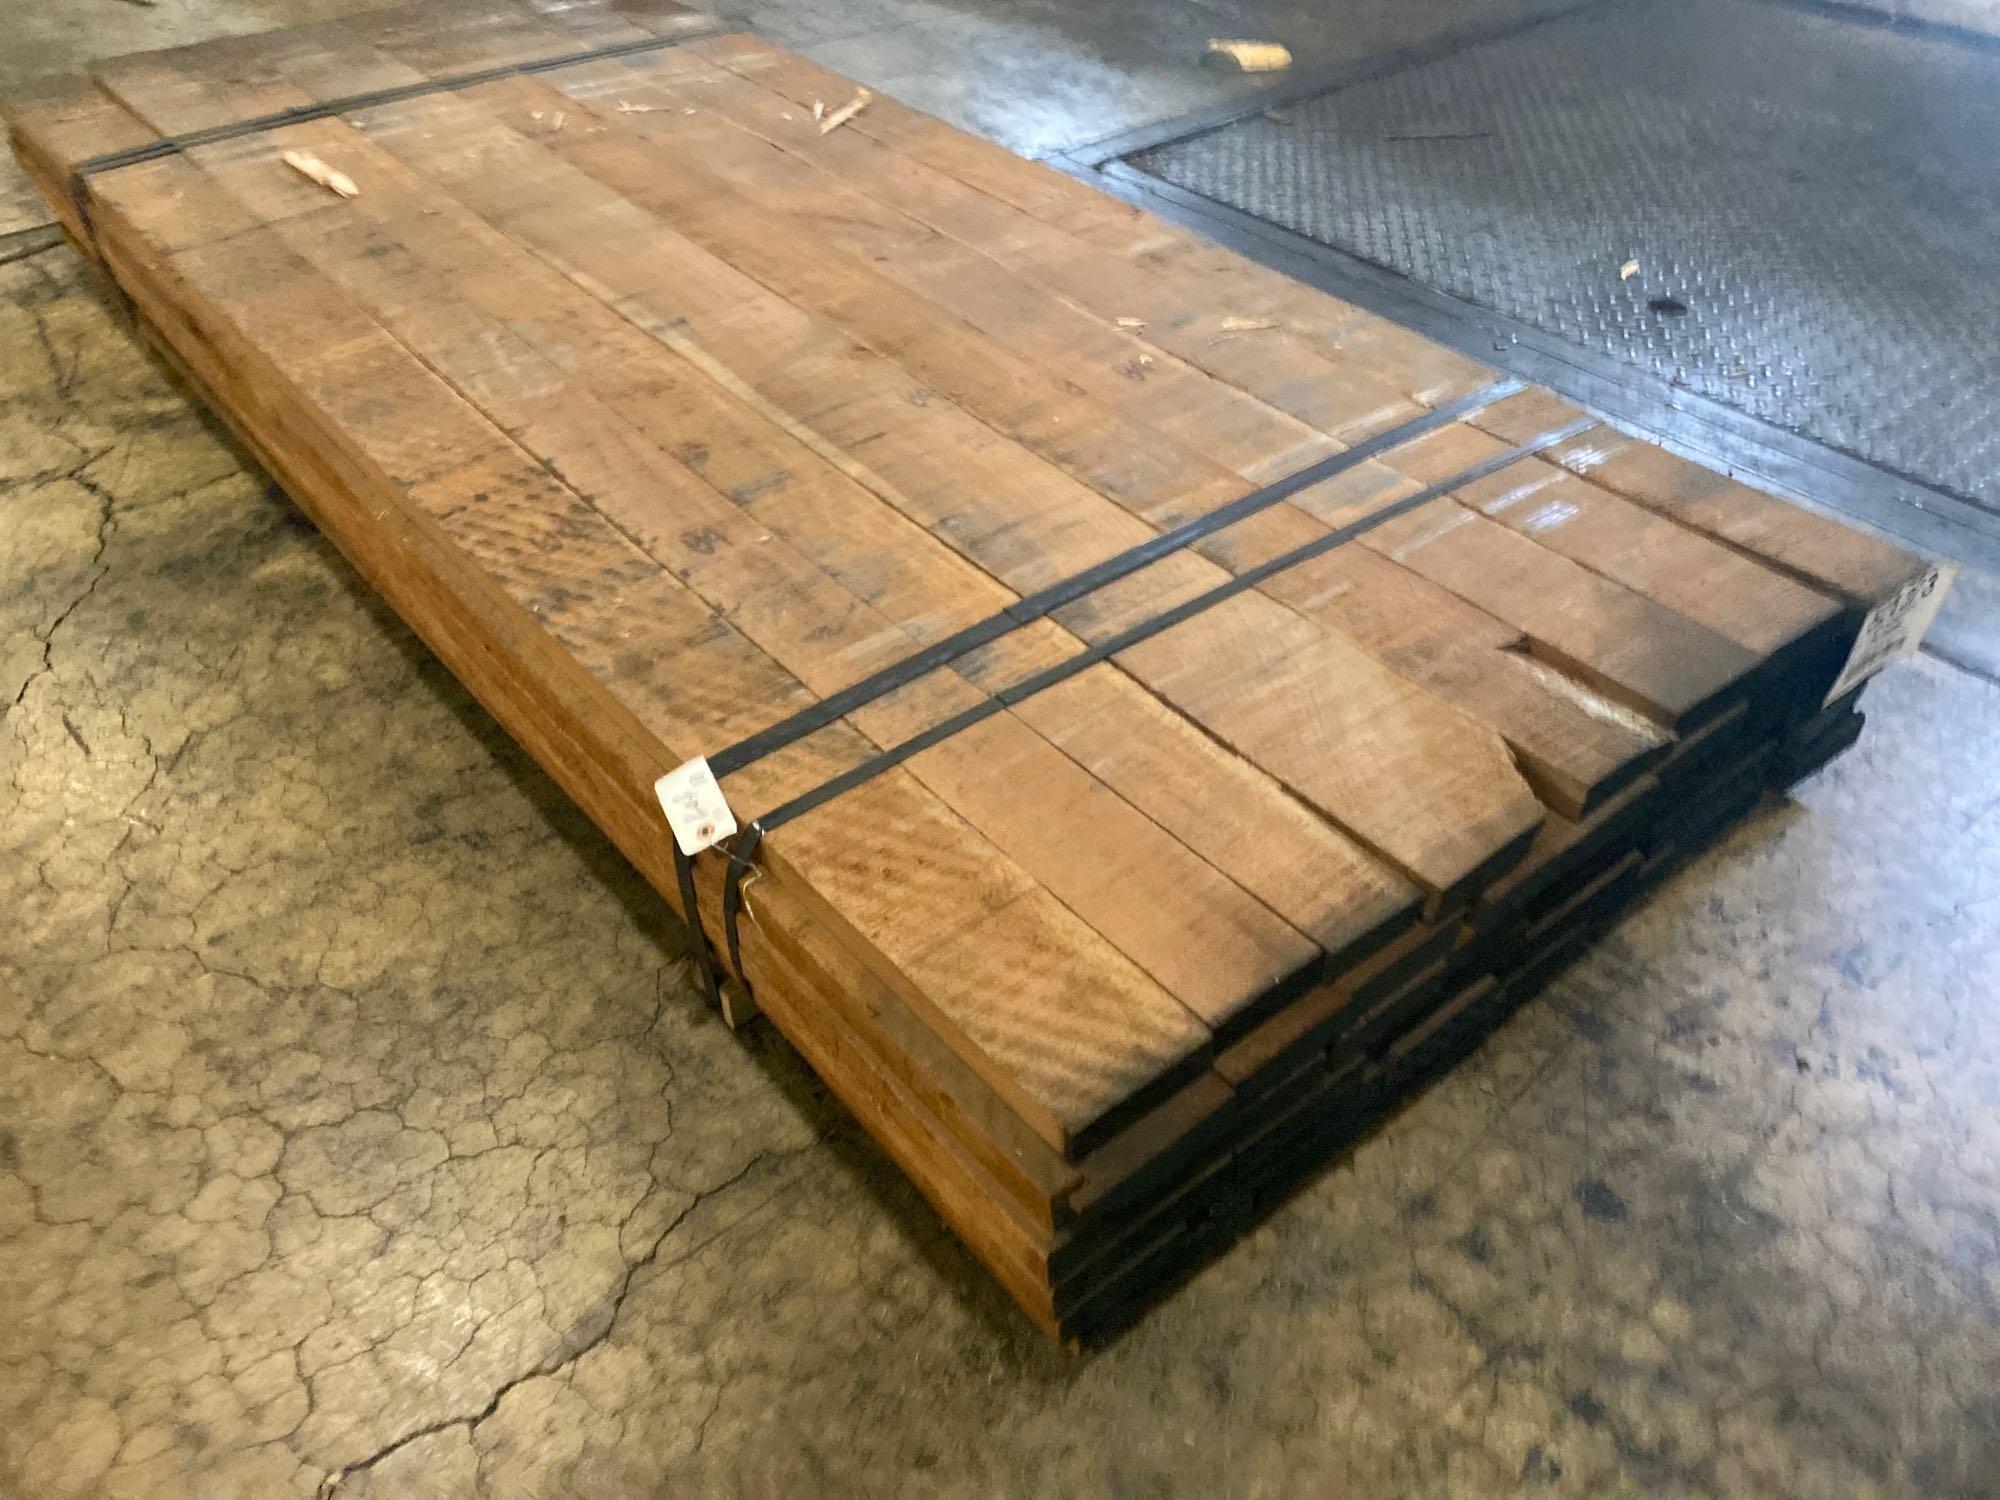 Approx 48 pcs of Prime Cherry Lumber, 5/4 thick